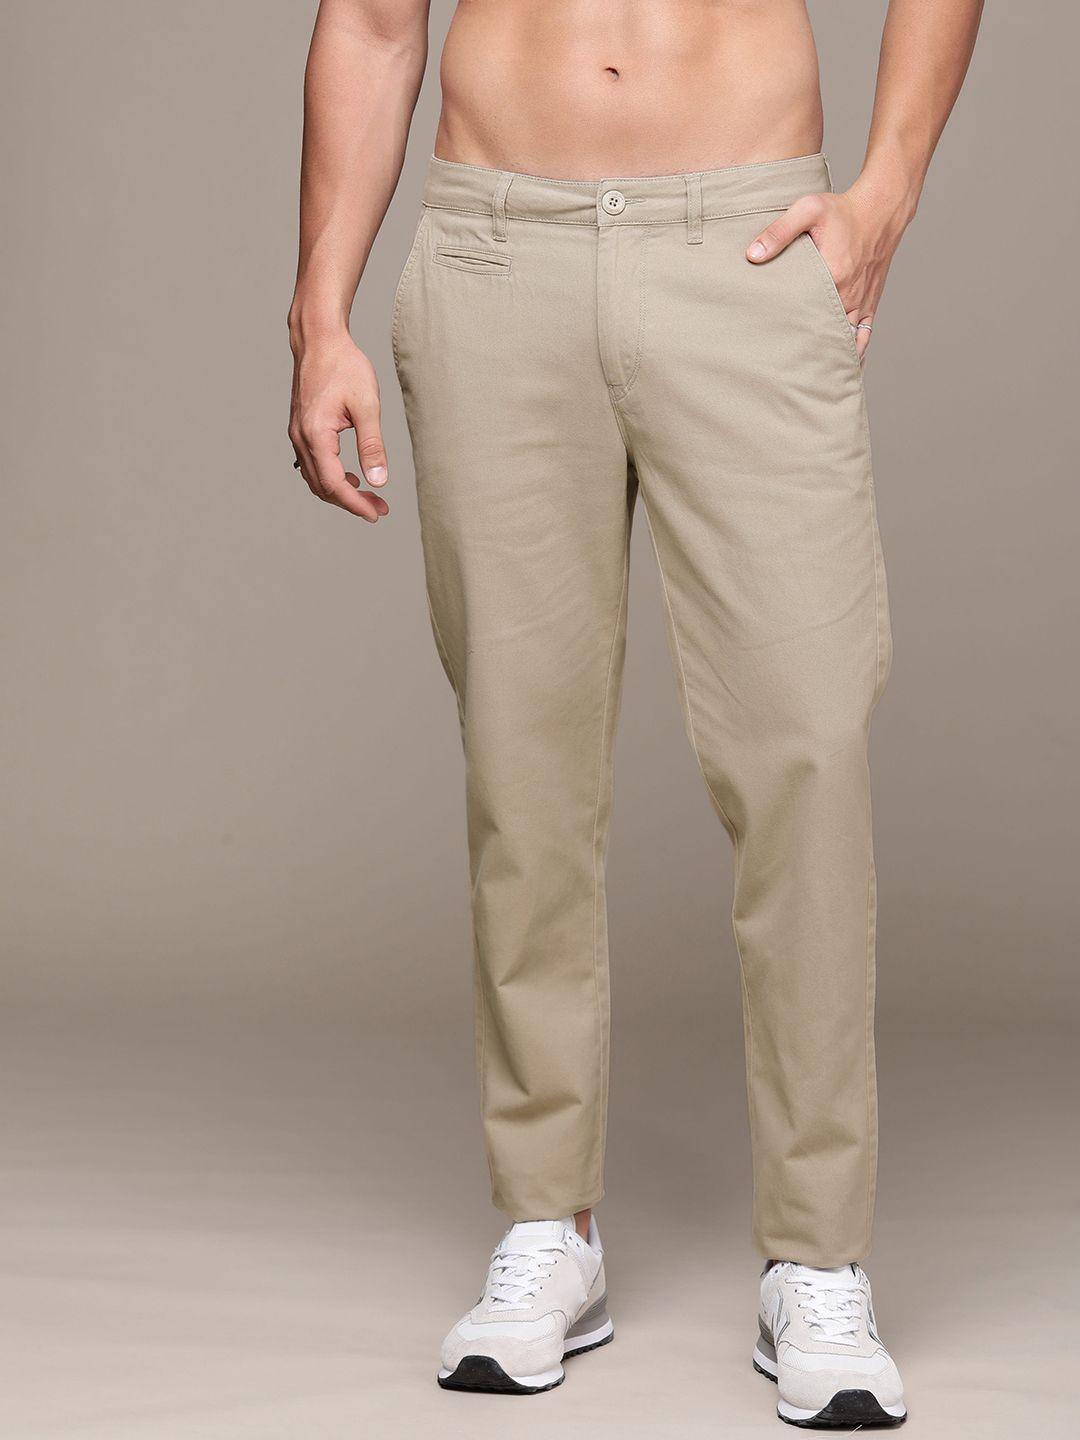 the roadster life co. men solid pure cotton regular fit chinos